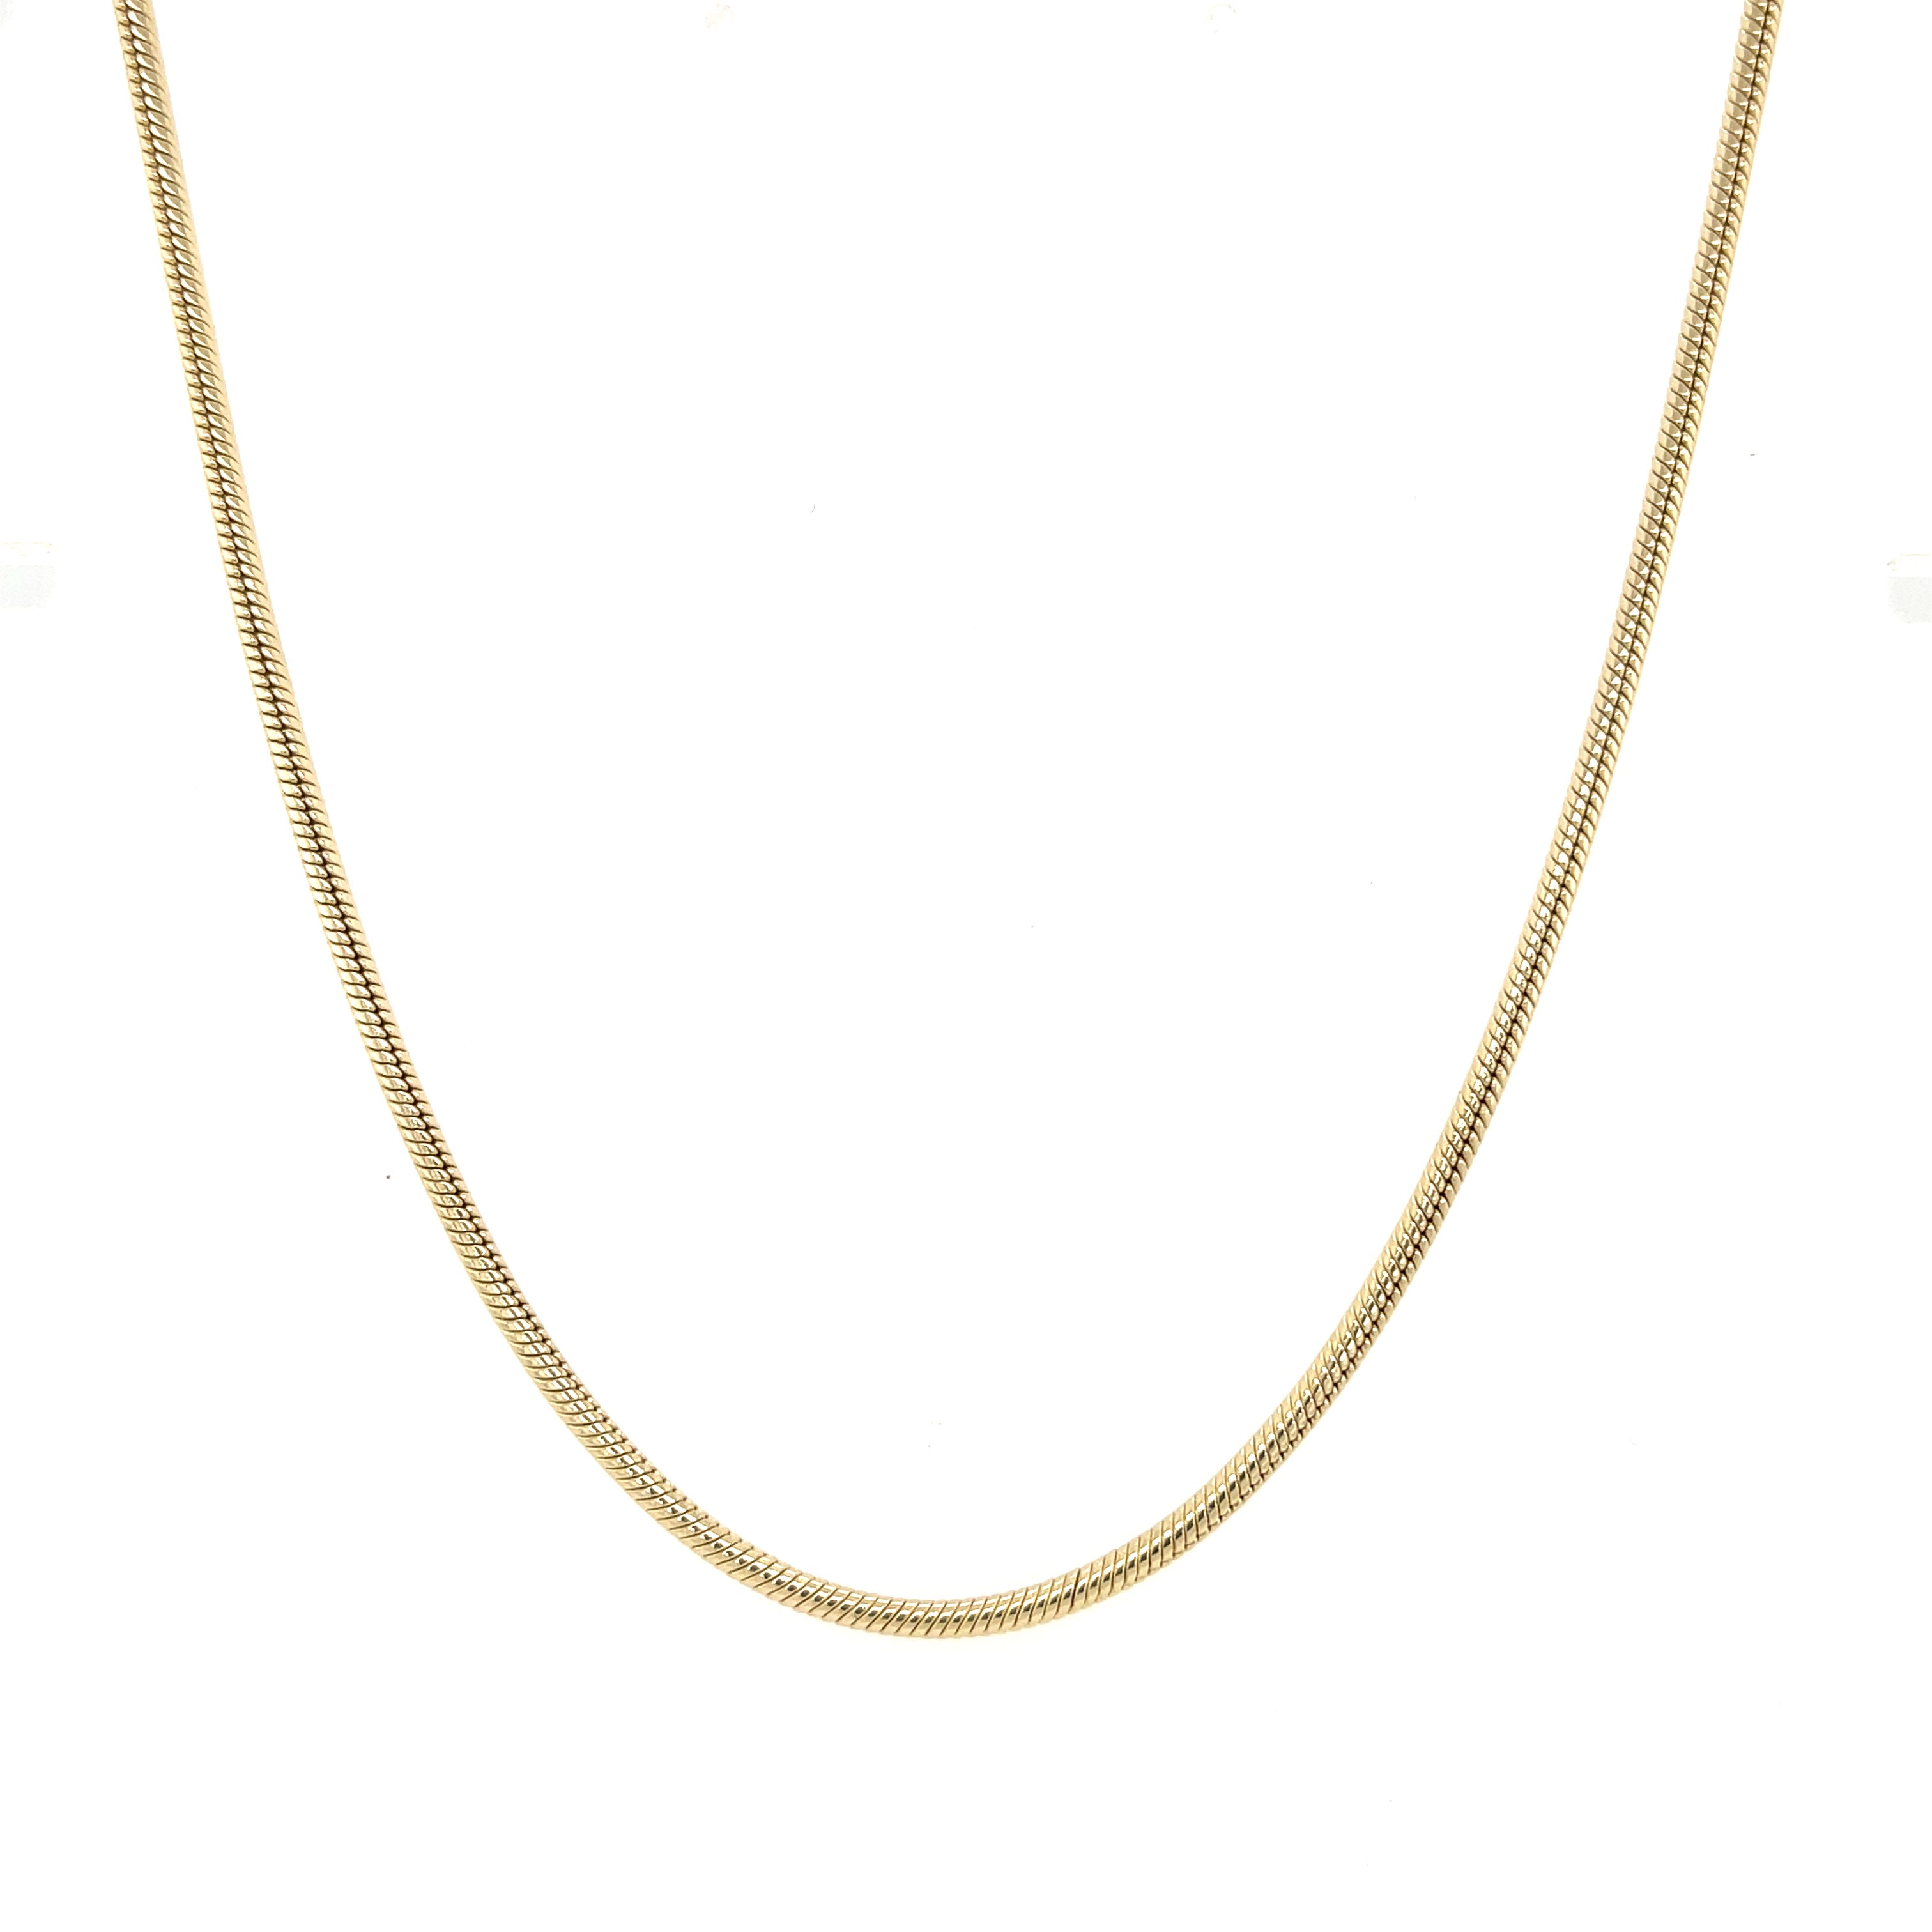 14ct Yellow Gold 16" Snake Chain 11.75g SOLD